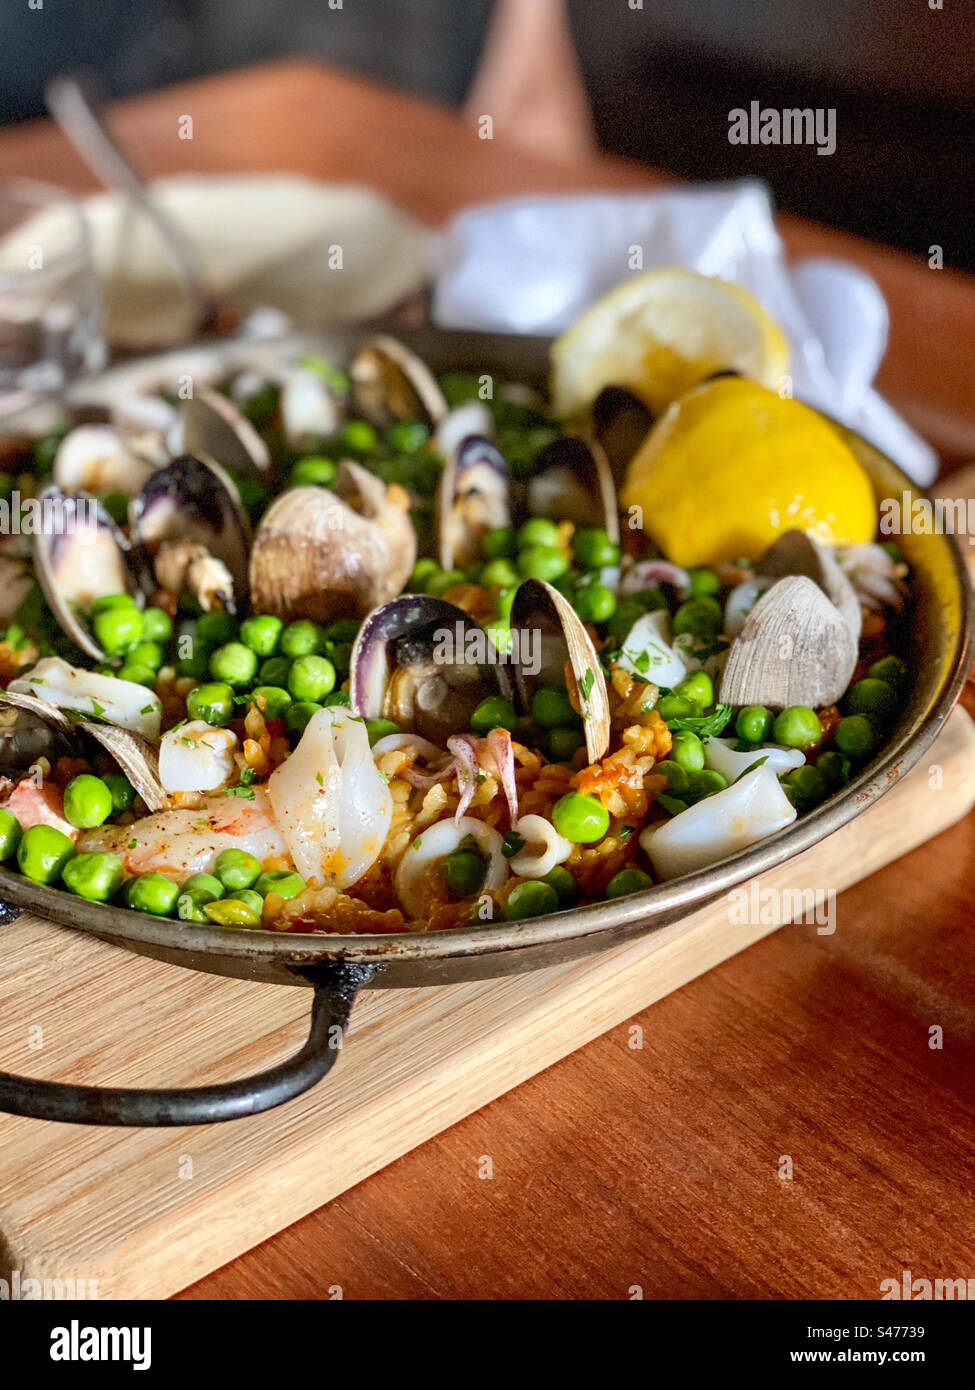 Spanish seafood paella served in a skillet, ready to eat. Stock Photo